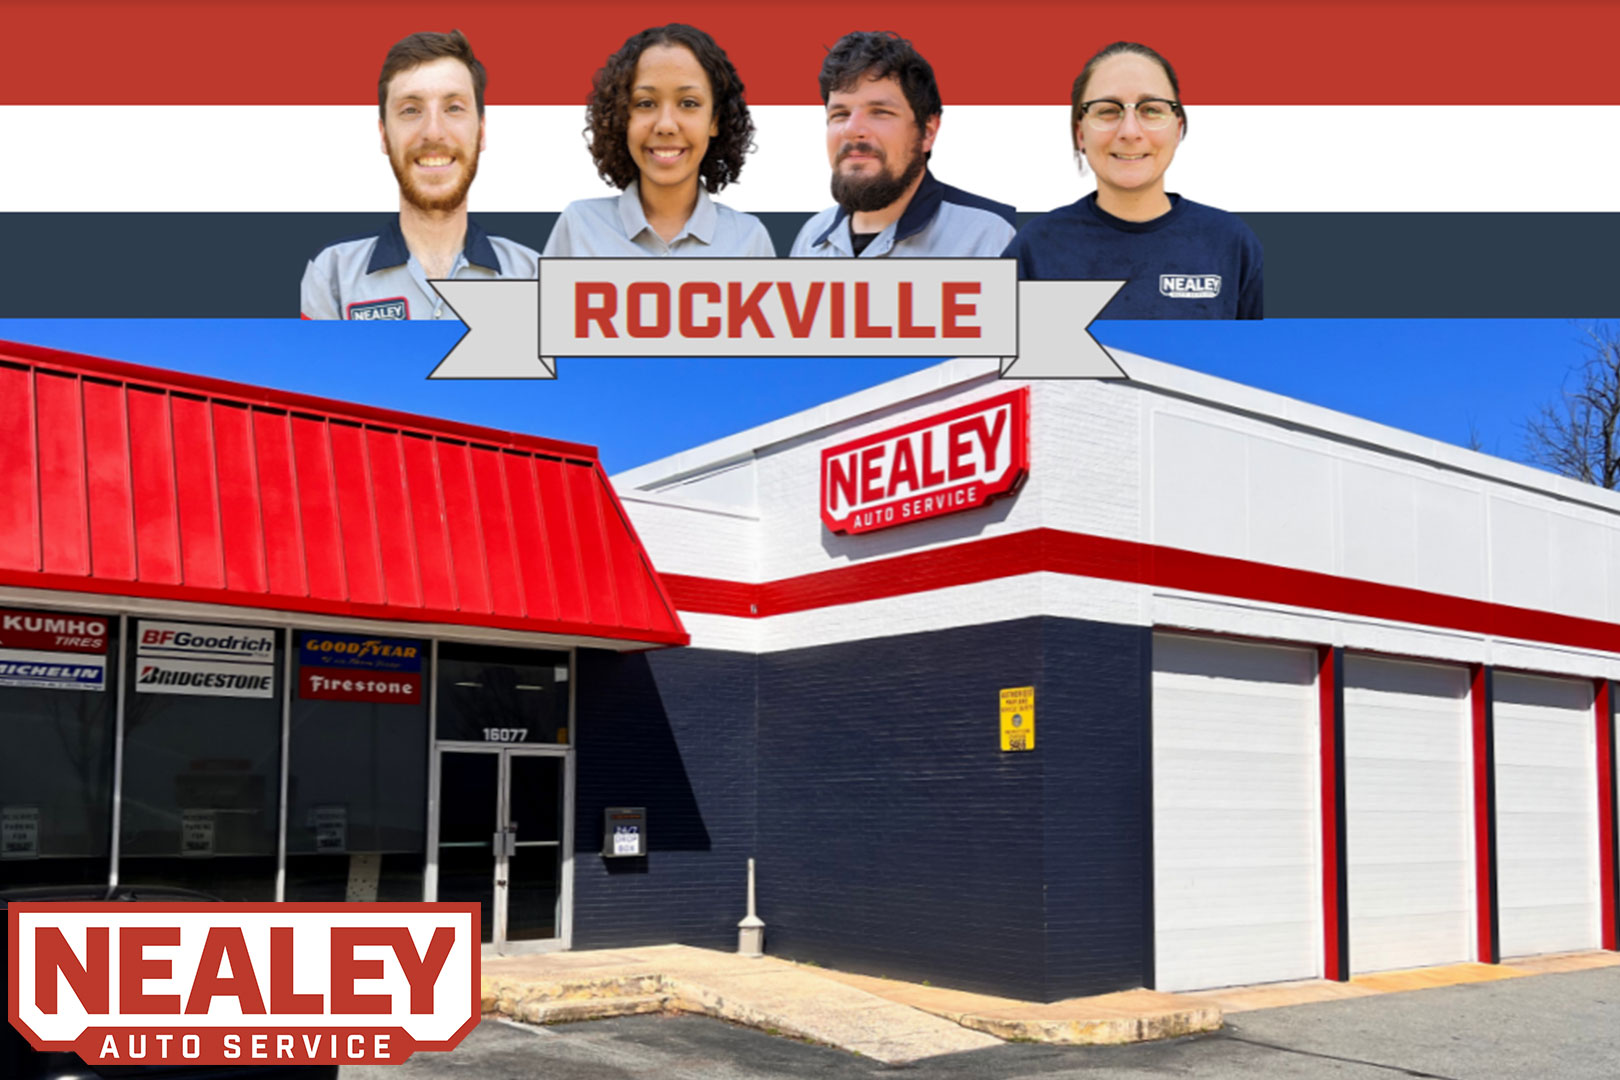 Nealey Tire & Auto - our Rockville location - Outside